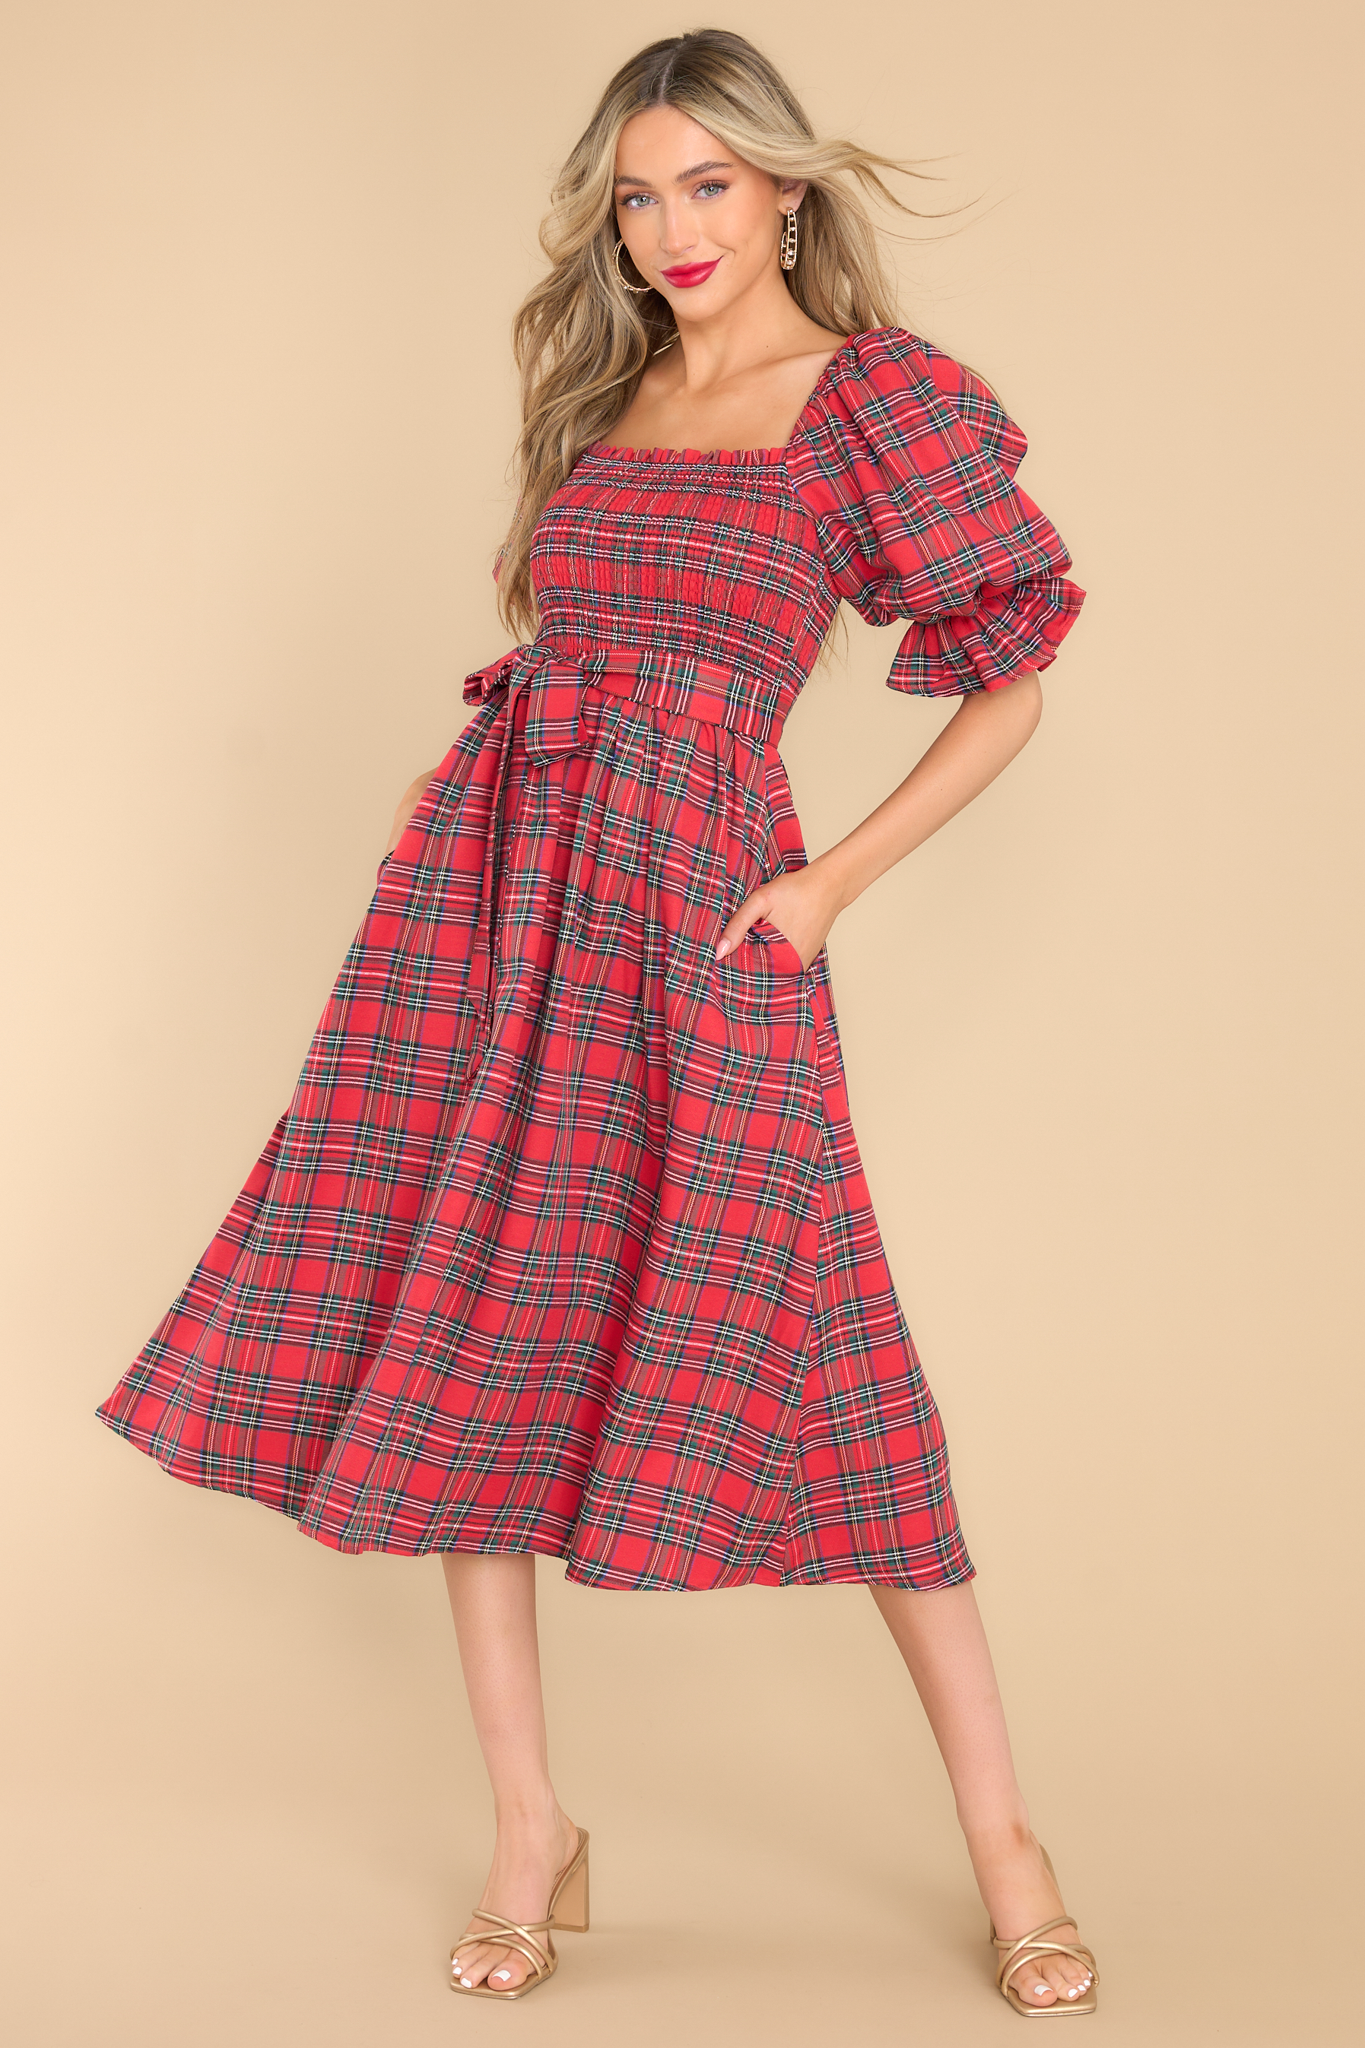 Full body view of red plaid dress featuring a square neckline. 